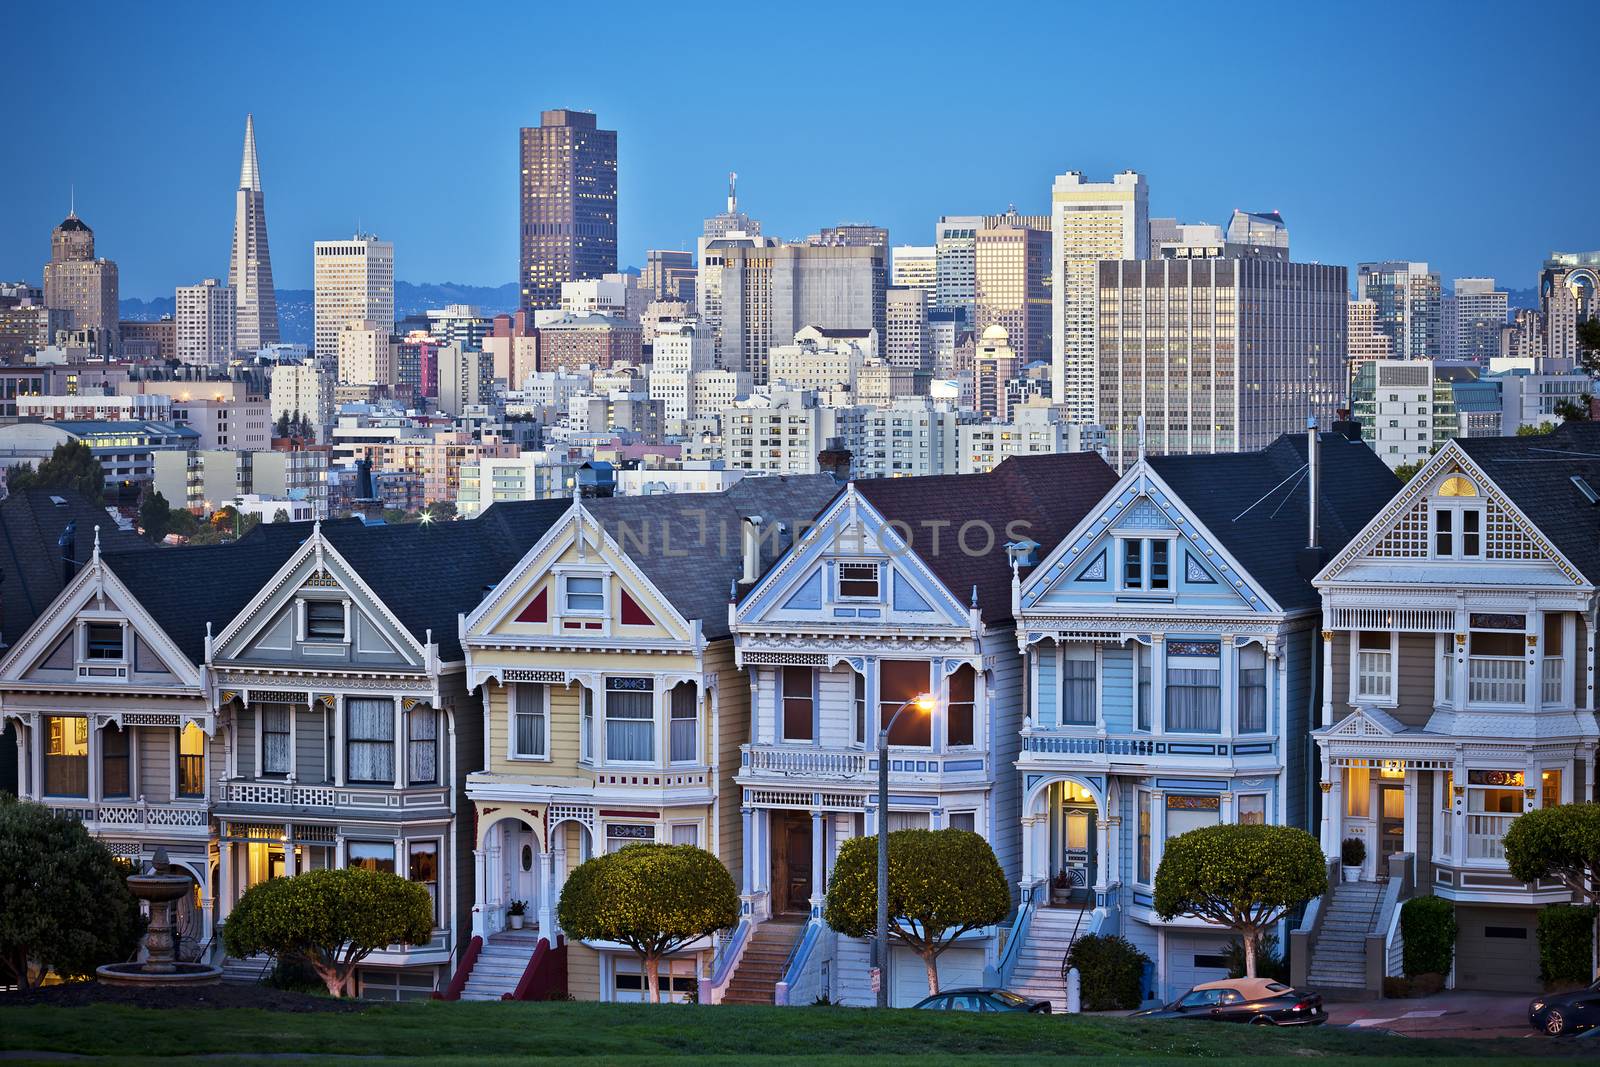 Famous Painted Ladies of San Francisco, California sit glowing amid the backdrop of a sunset and skyscrapers. 